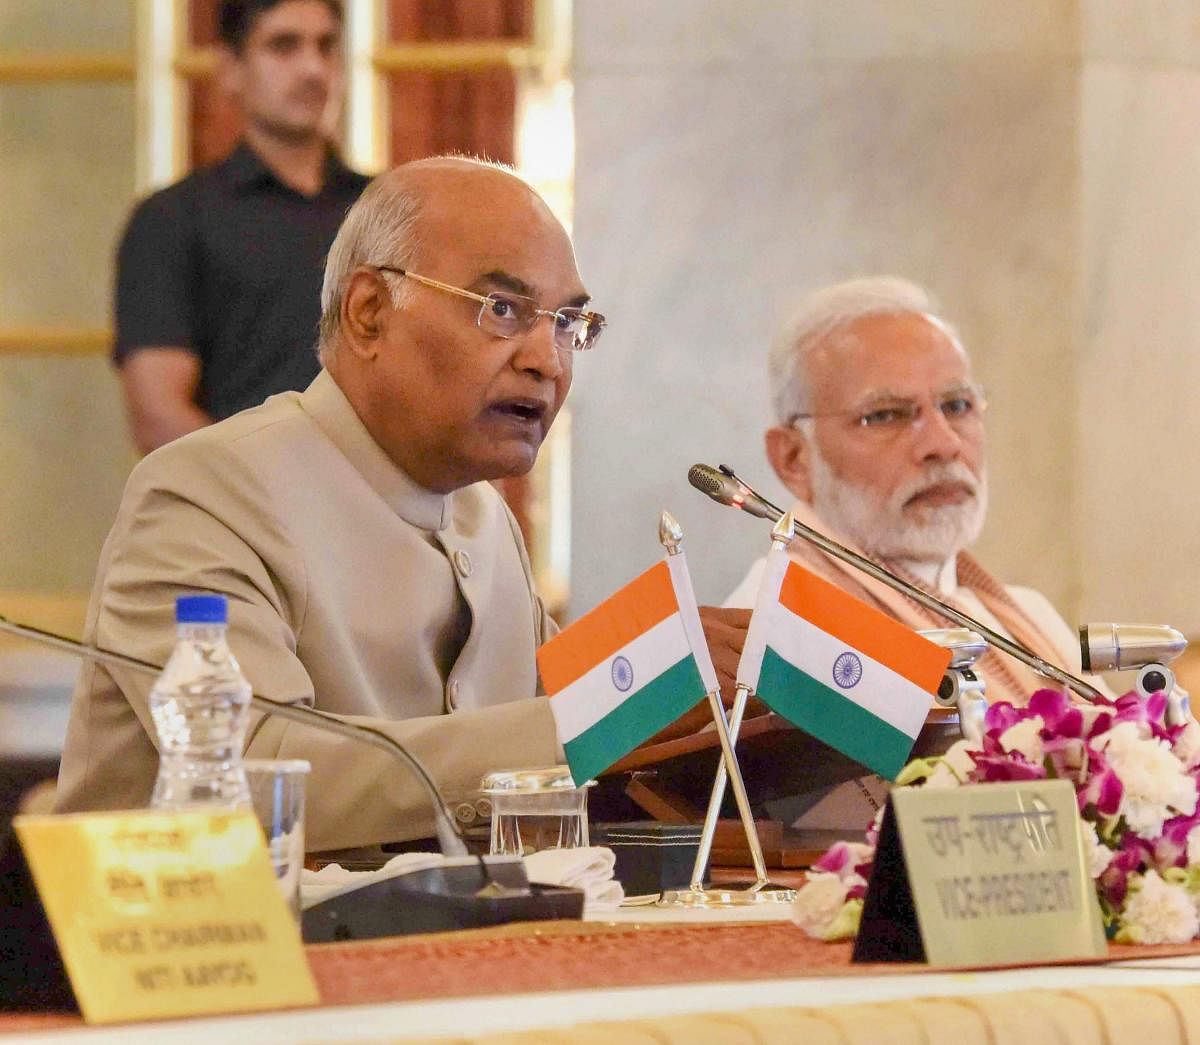 President Ram Nath Kovind speaks as Prime Minister Narendra Modi looks on, during the second day of the Conference of Governors at Rashtrapati Bhavan, in New Delhi. PTI Photo